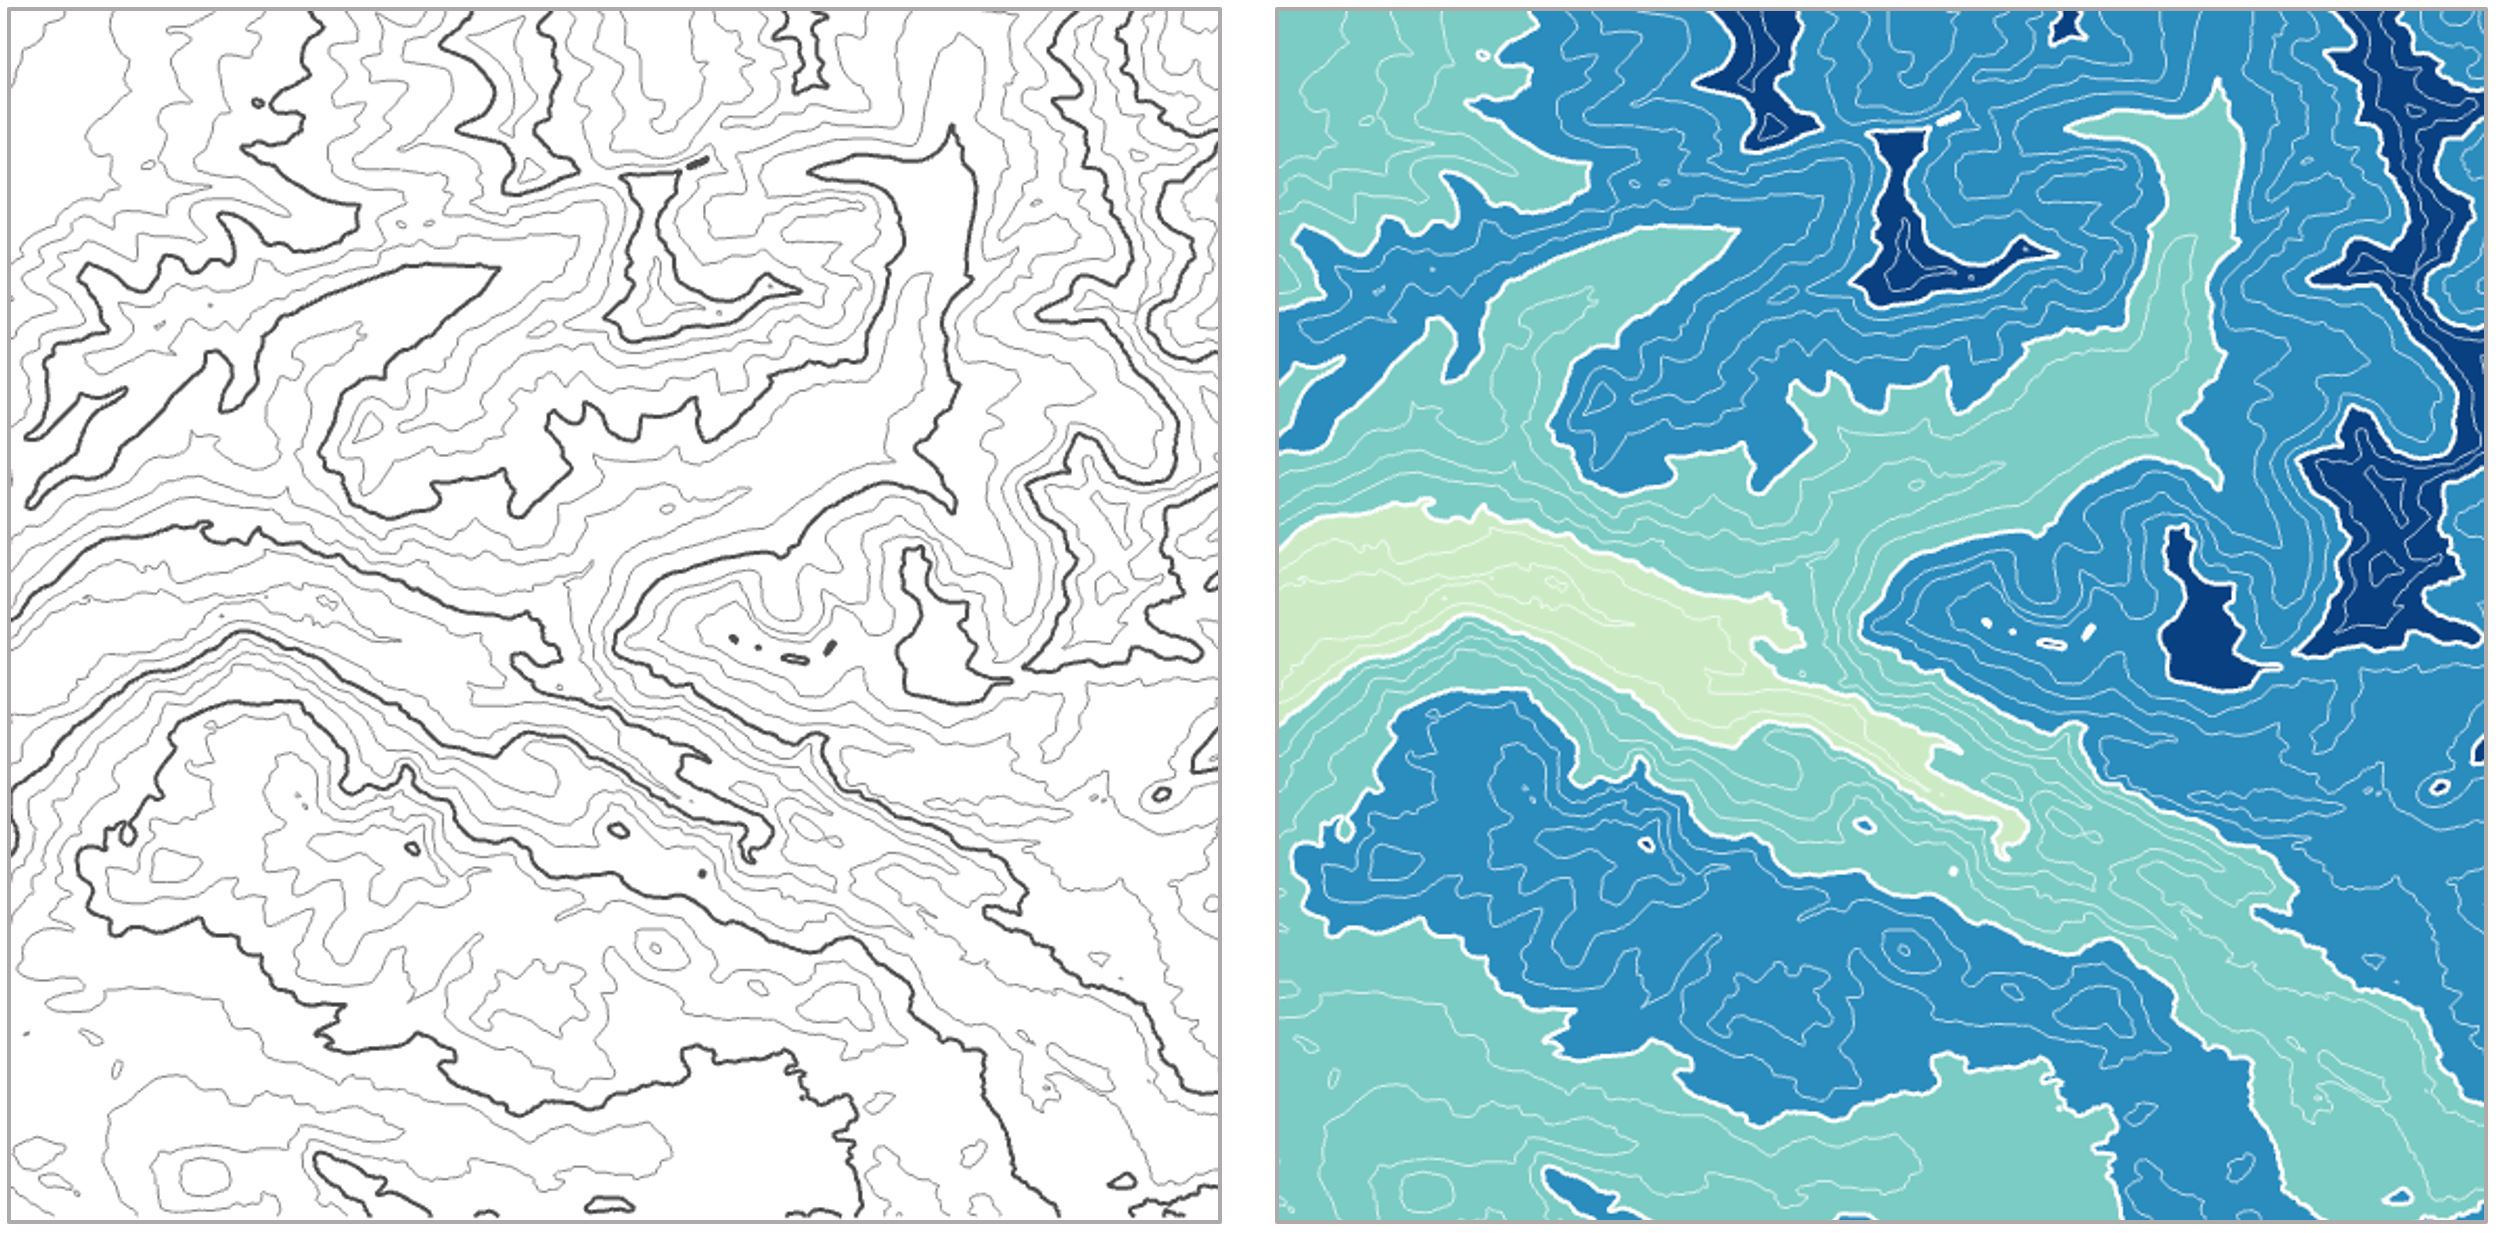 examples of contour lines without and with hypsometric tinting